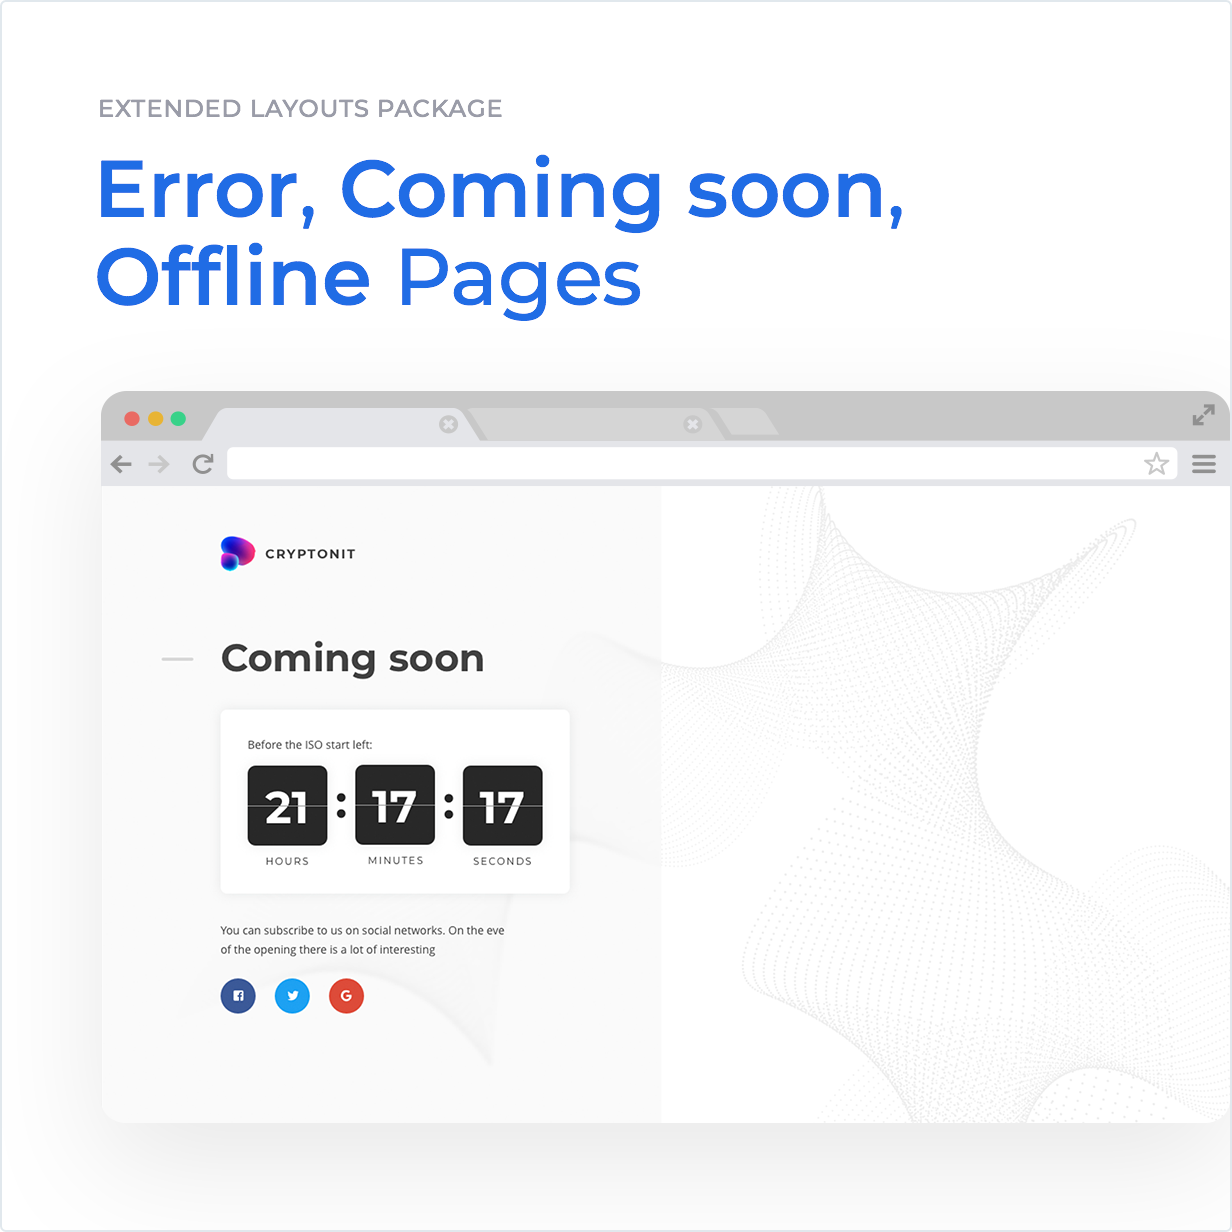 Extended layouts package: Error, Coming soon, Offline Pages